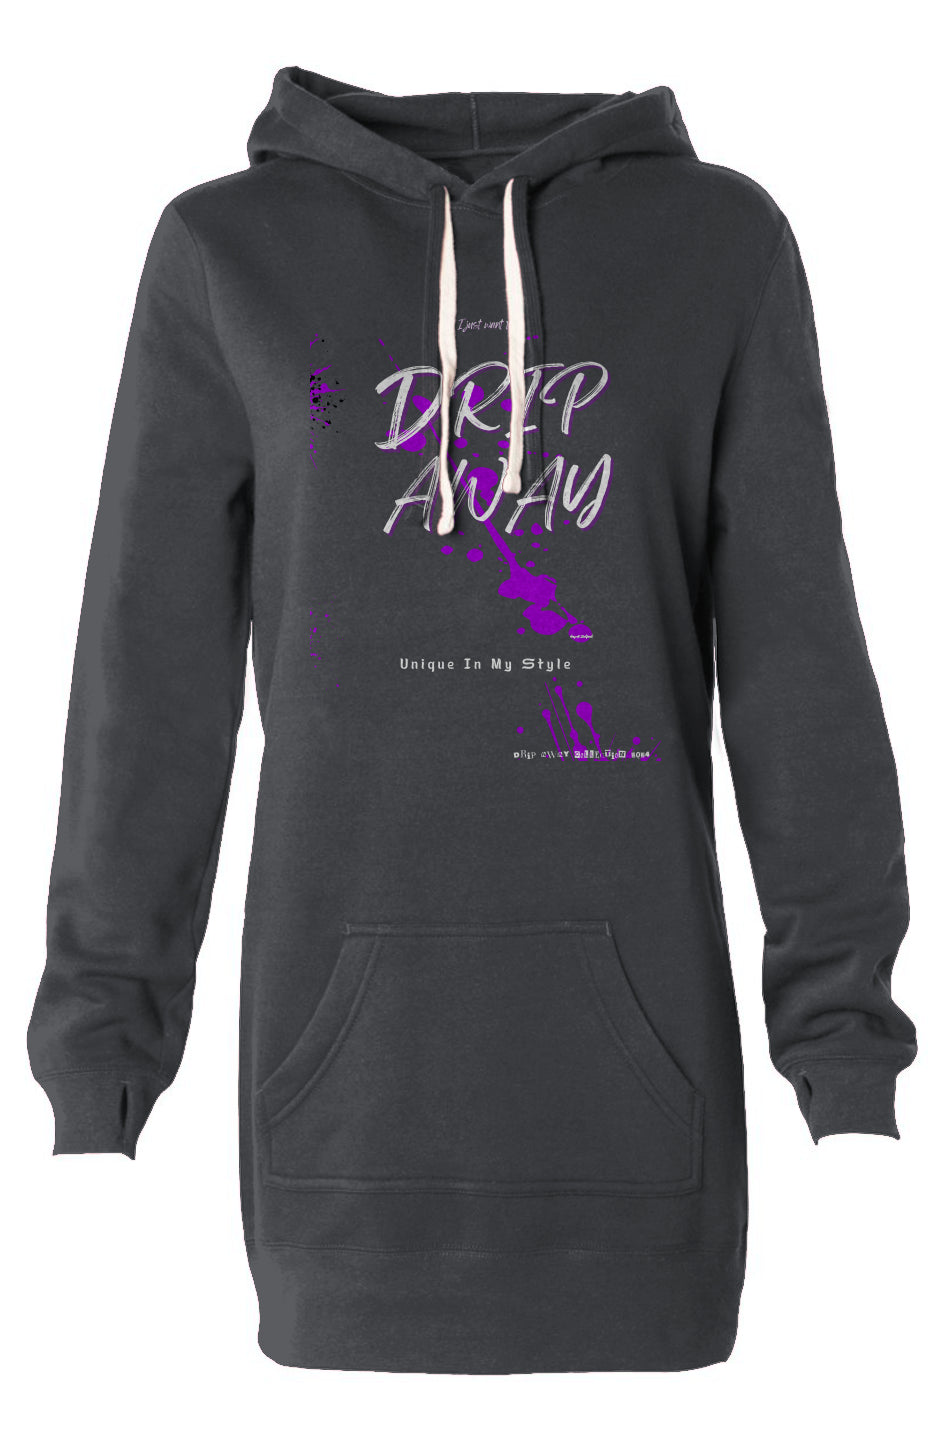 I just want to DRIPAWAY by42dpd Accent Purple Hooded Sweatshirt Dress (Carbon)